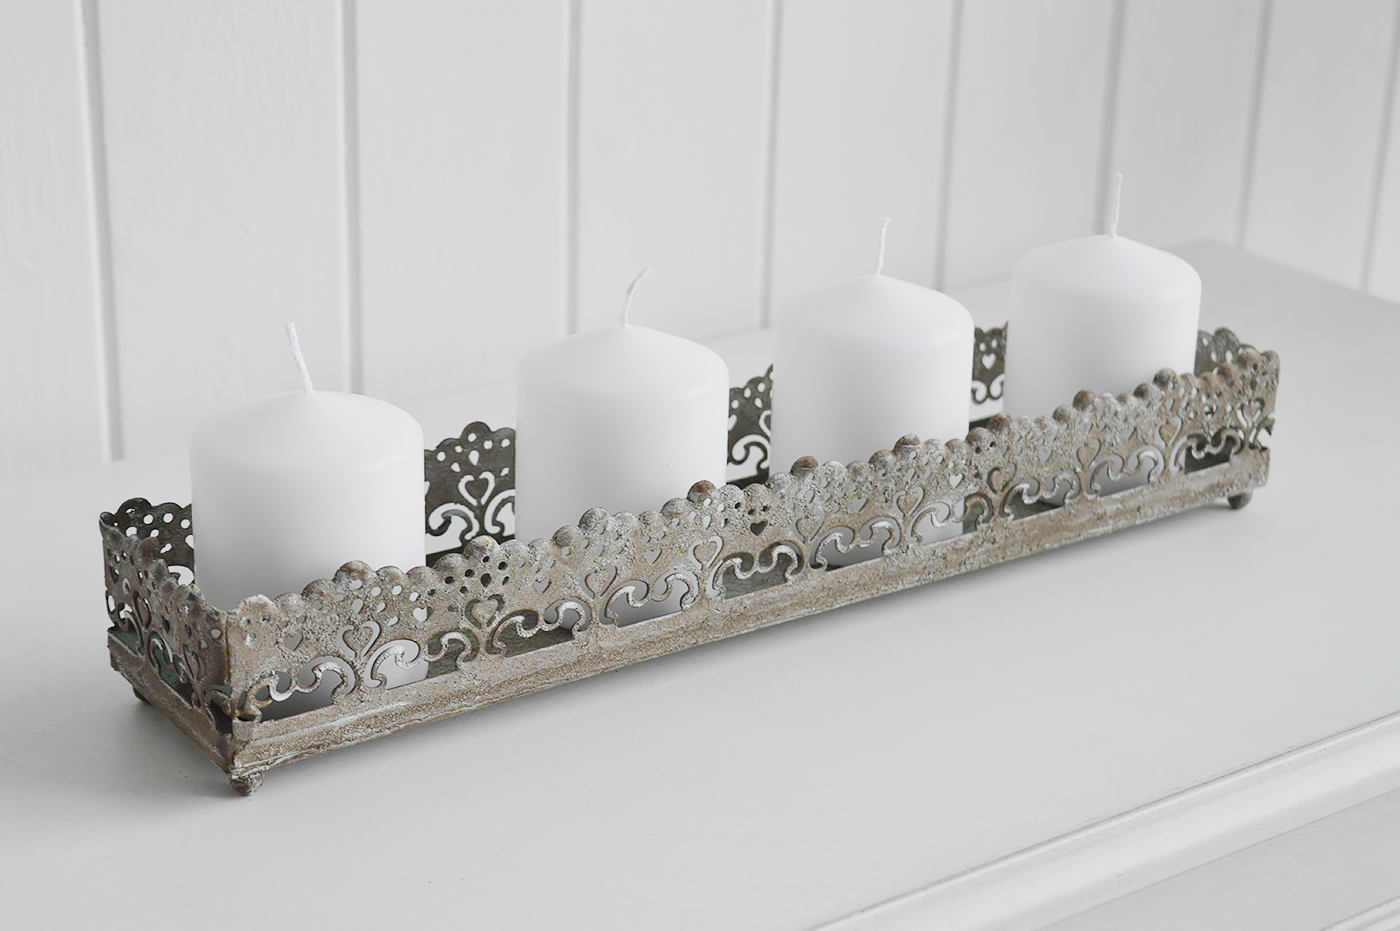 Vintage Candle Holder Tray - New England, Coastal and Country Accessories and Furniture for home interiors